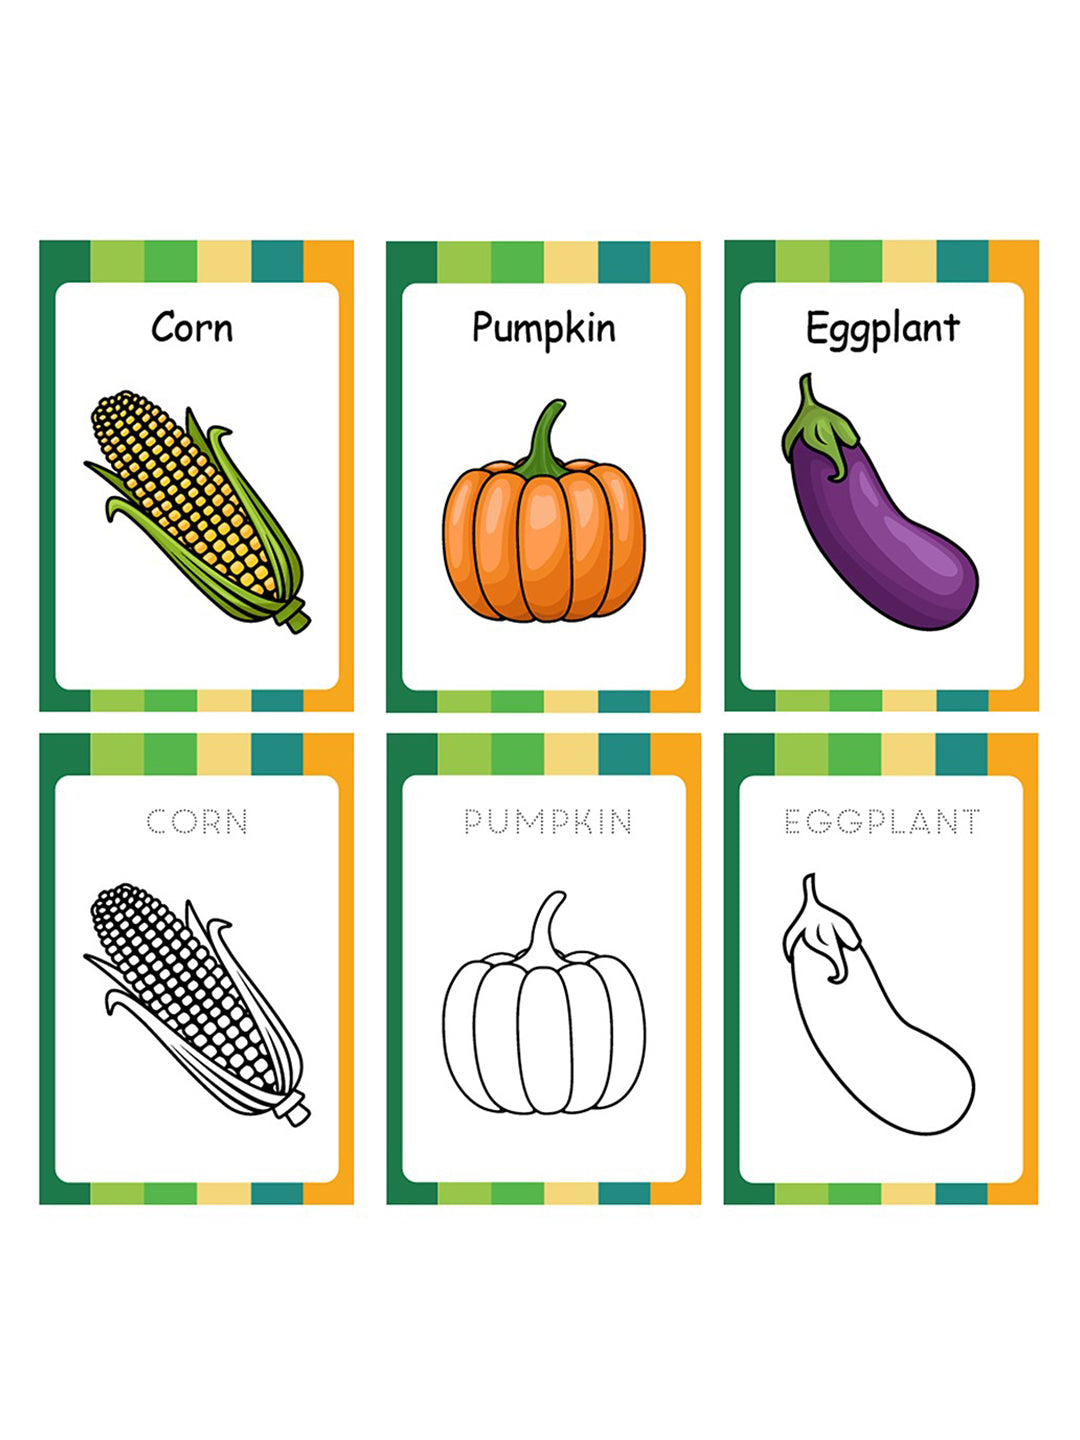 Baby's fruits and vegetable Flash Cards